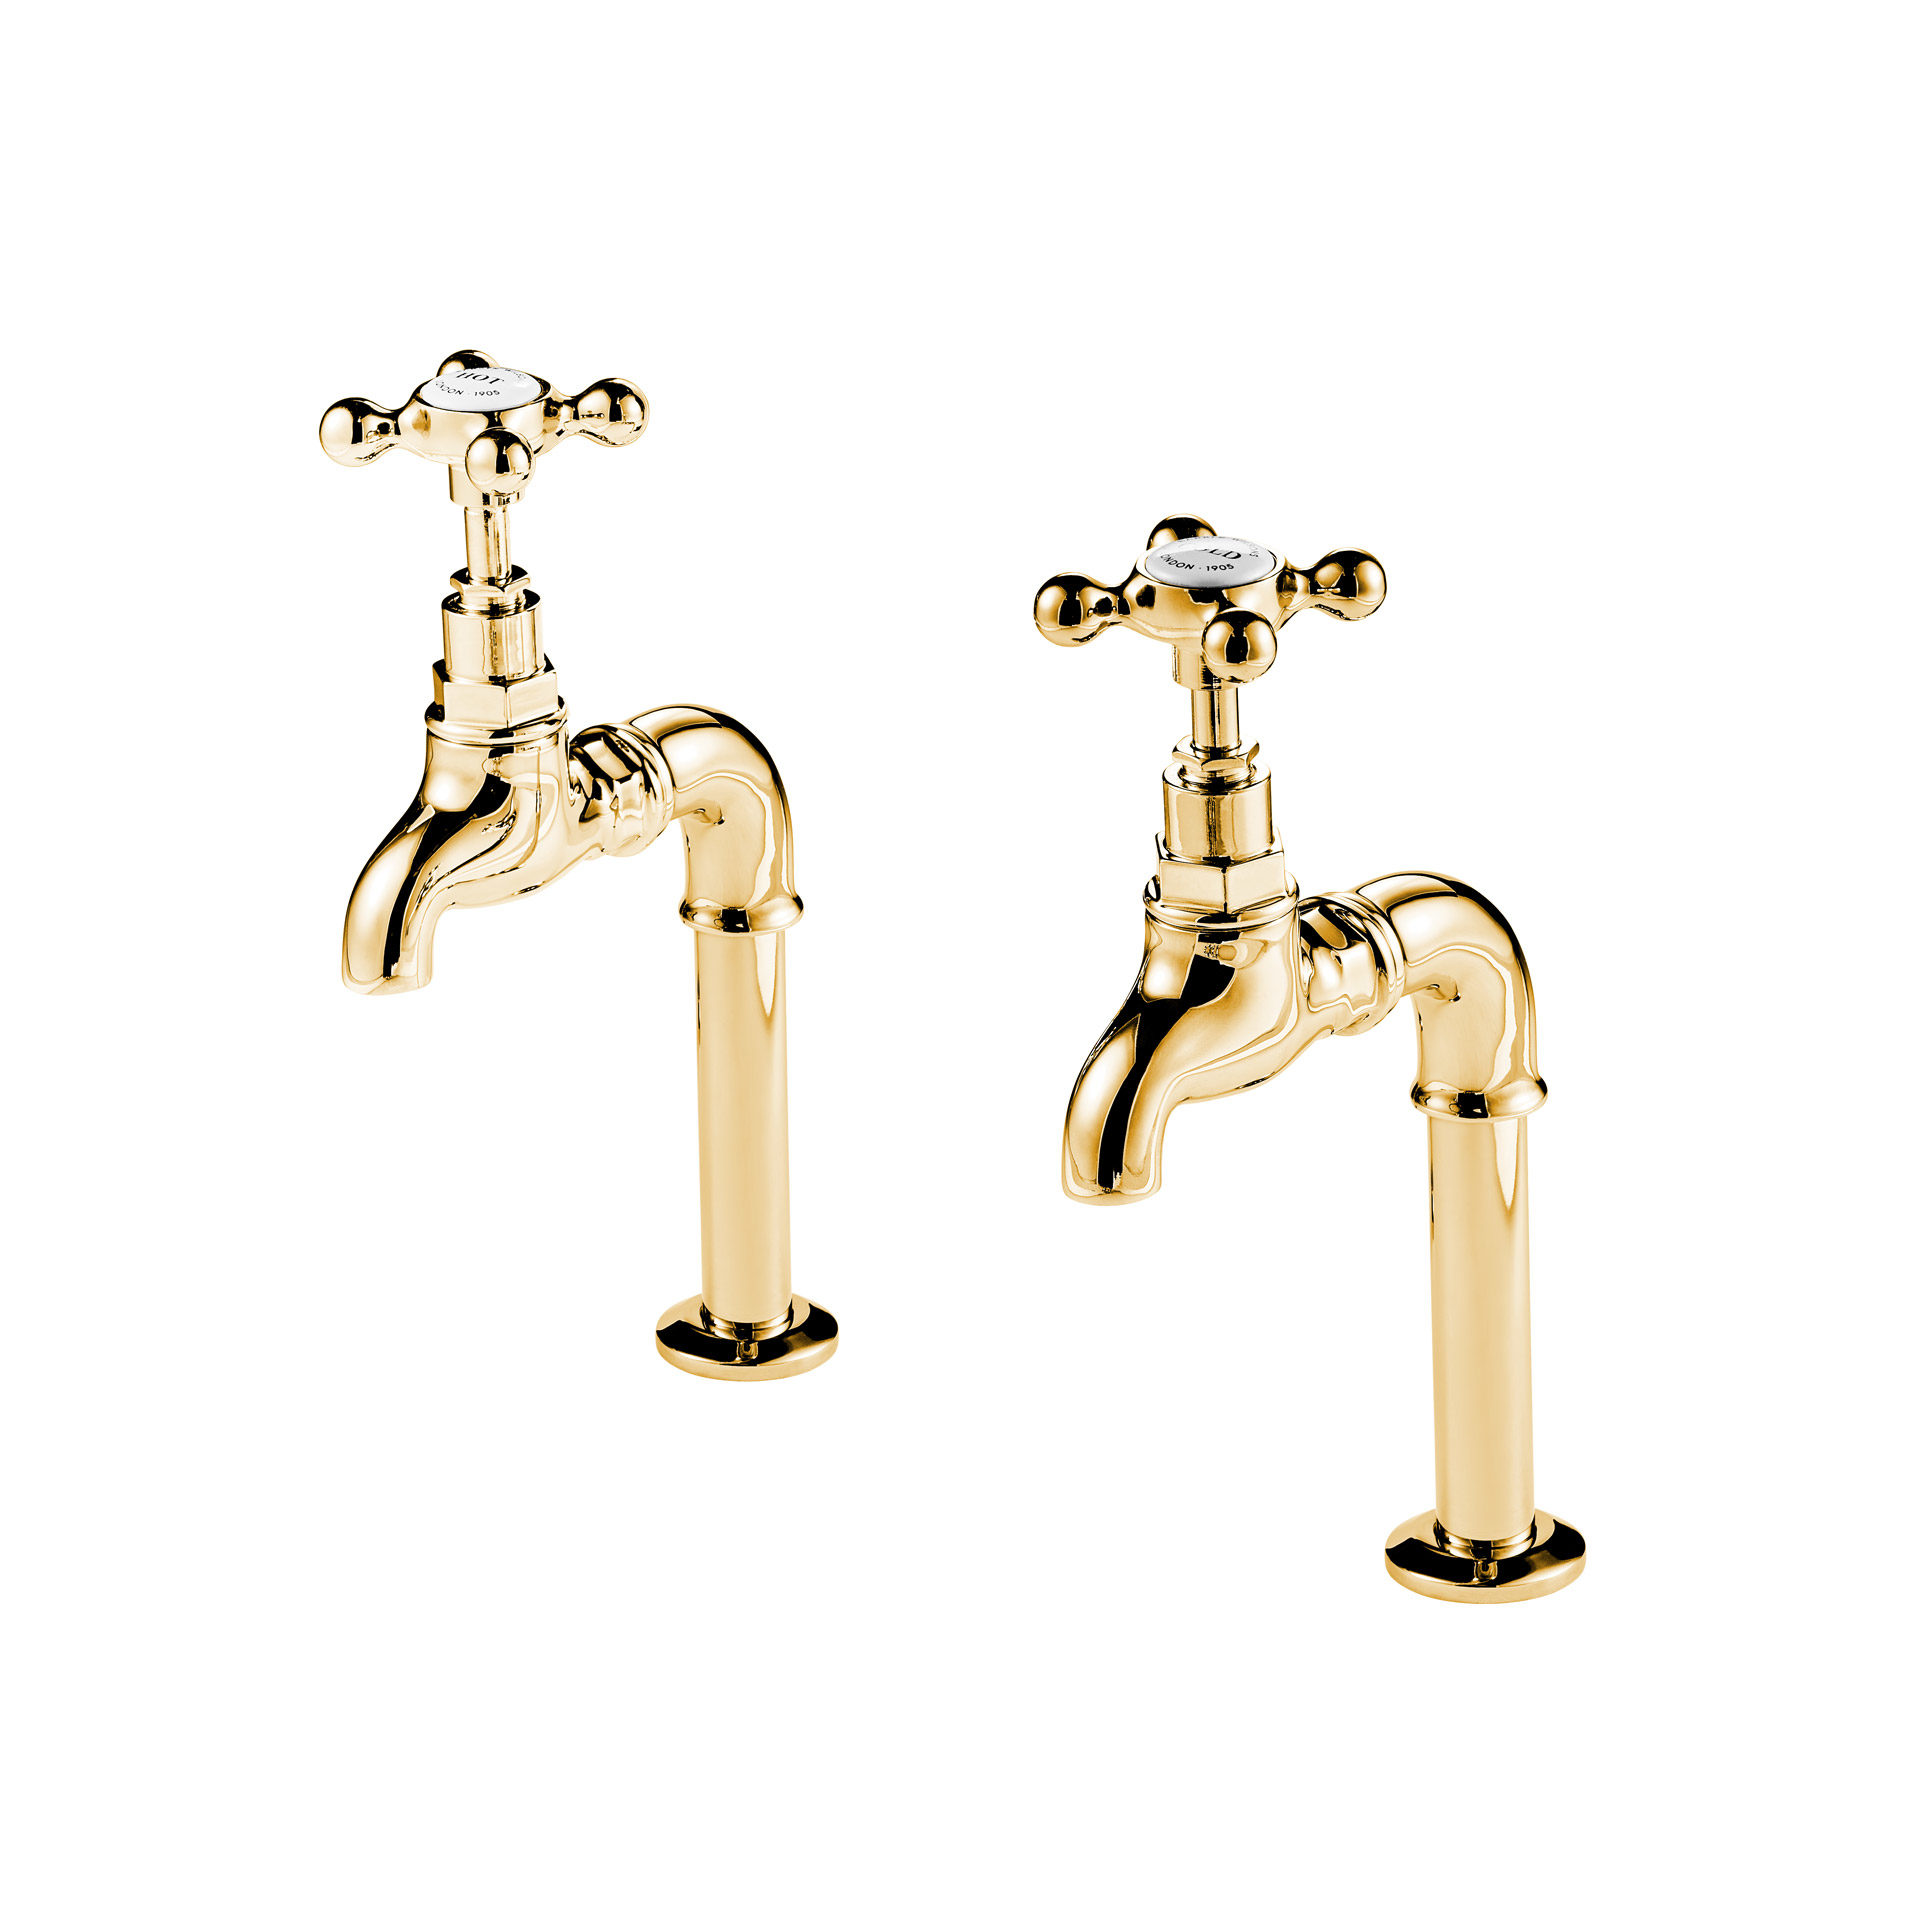 Barber Wilsons 6" Deck and Wall Mounted Brass Bib Taps with Crosshead - Regent 260, 1890's Style